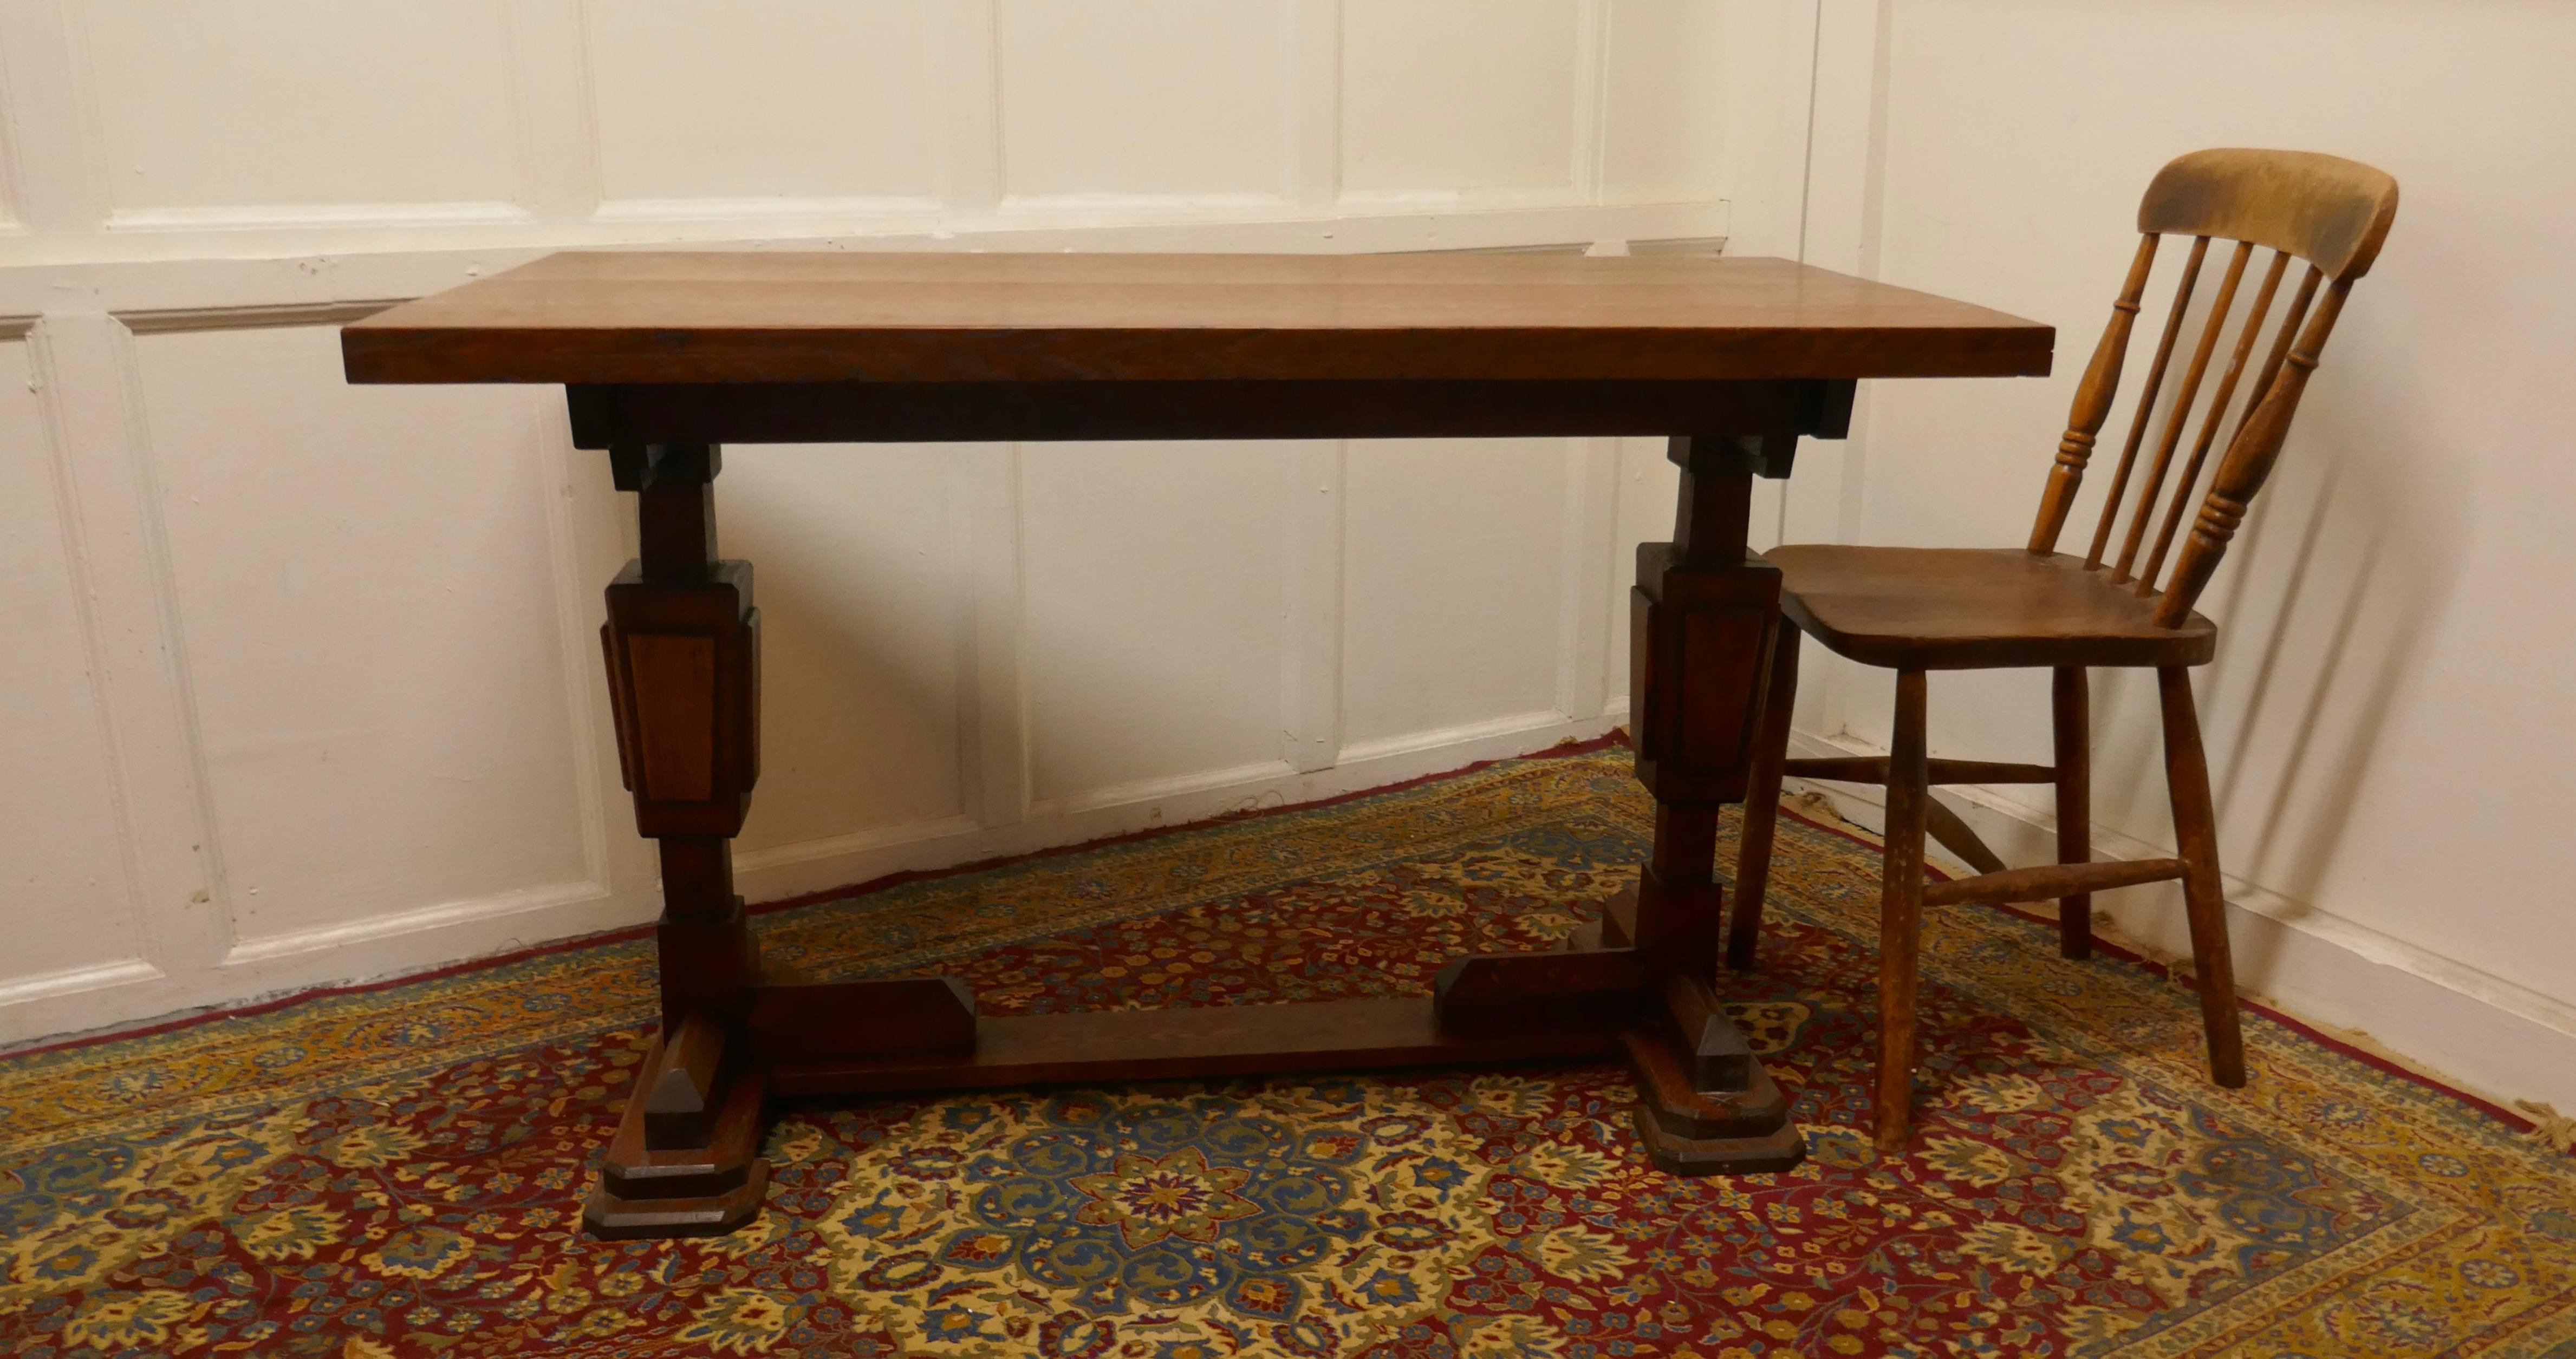 Art Deco oak refectory table

Oak refectory, this is a great table, the top is in 2” thick Oak, with splendid patina 
The table legs are an unusual Odeon design, the table is in good and handsome condition 
Measures: The table is 47” long, 26”